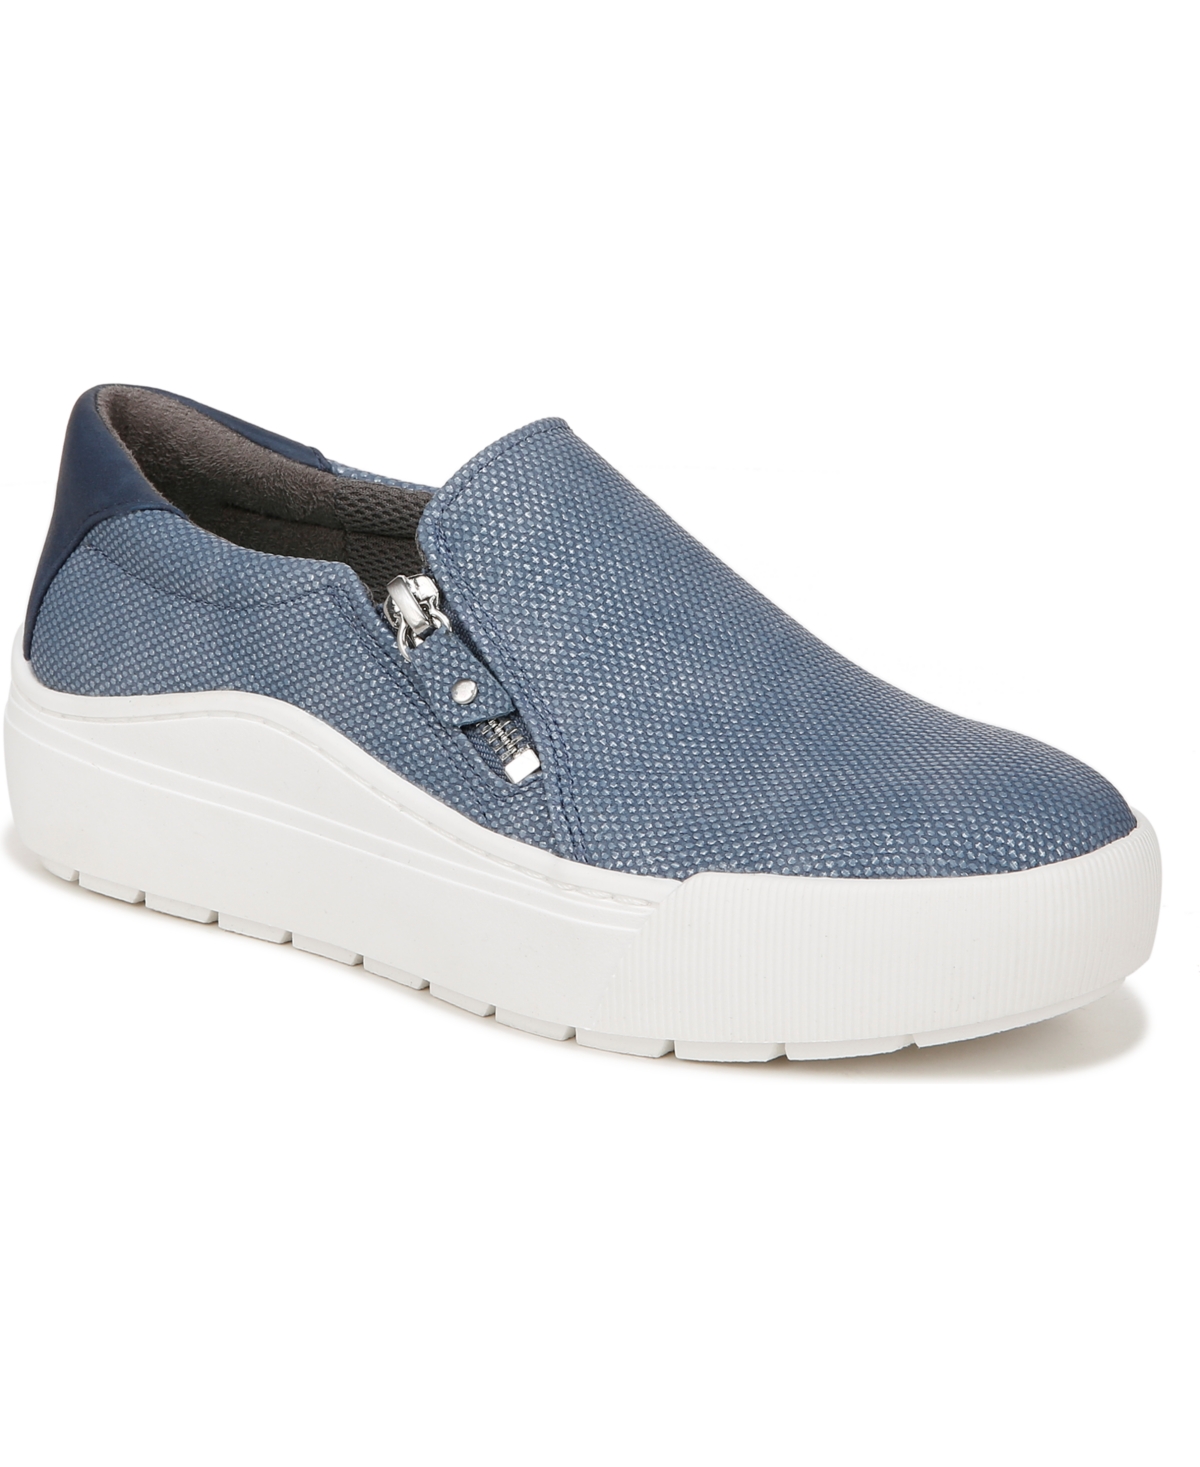 Women's Time Off Now Slip-Ons - Oxide Blue Faux Leather